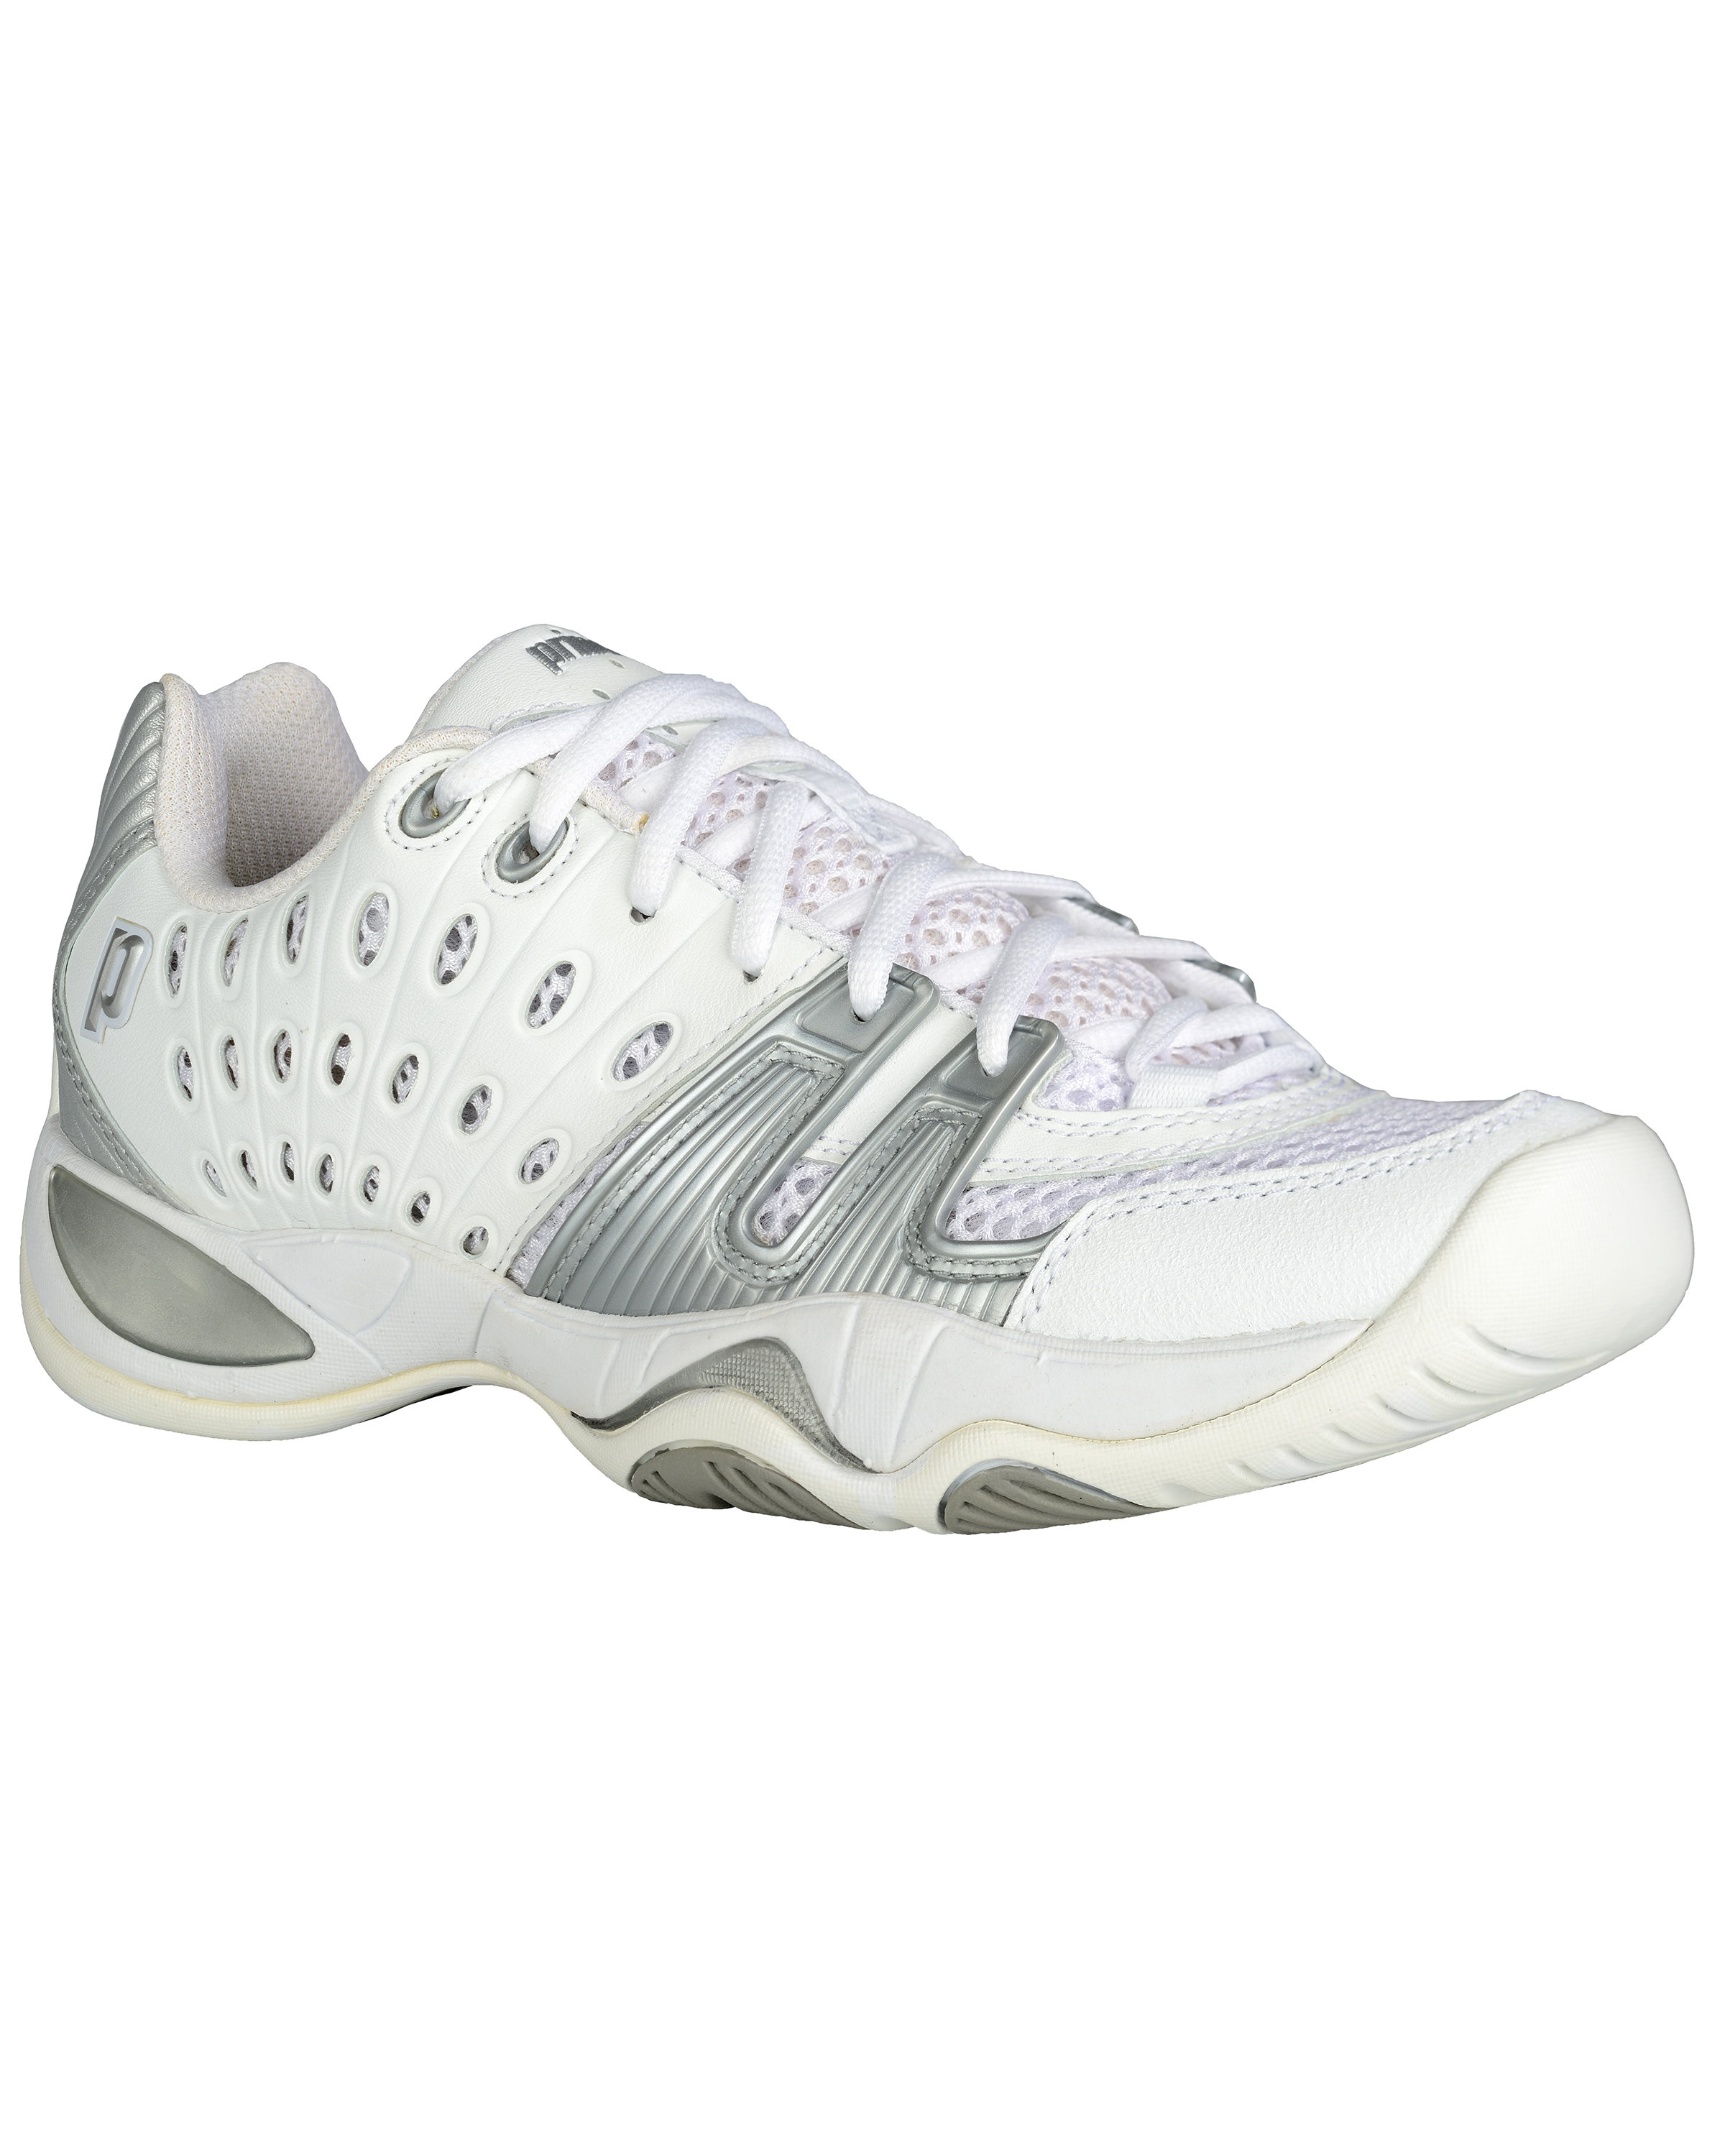 Womens T22 (White_Silver) - Angle 1 8P985-862.png